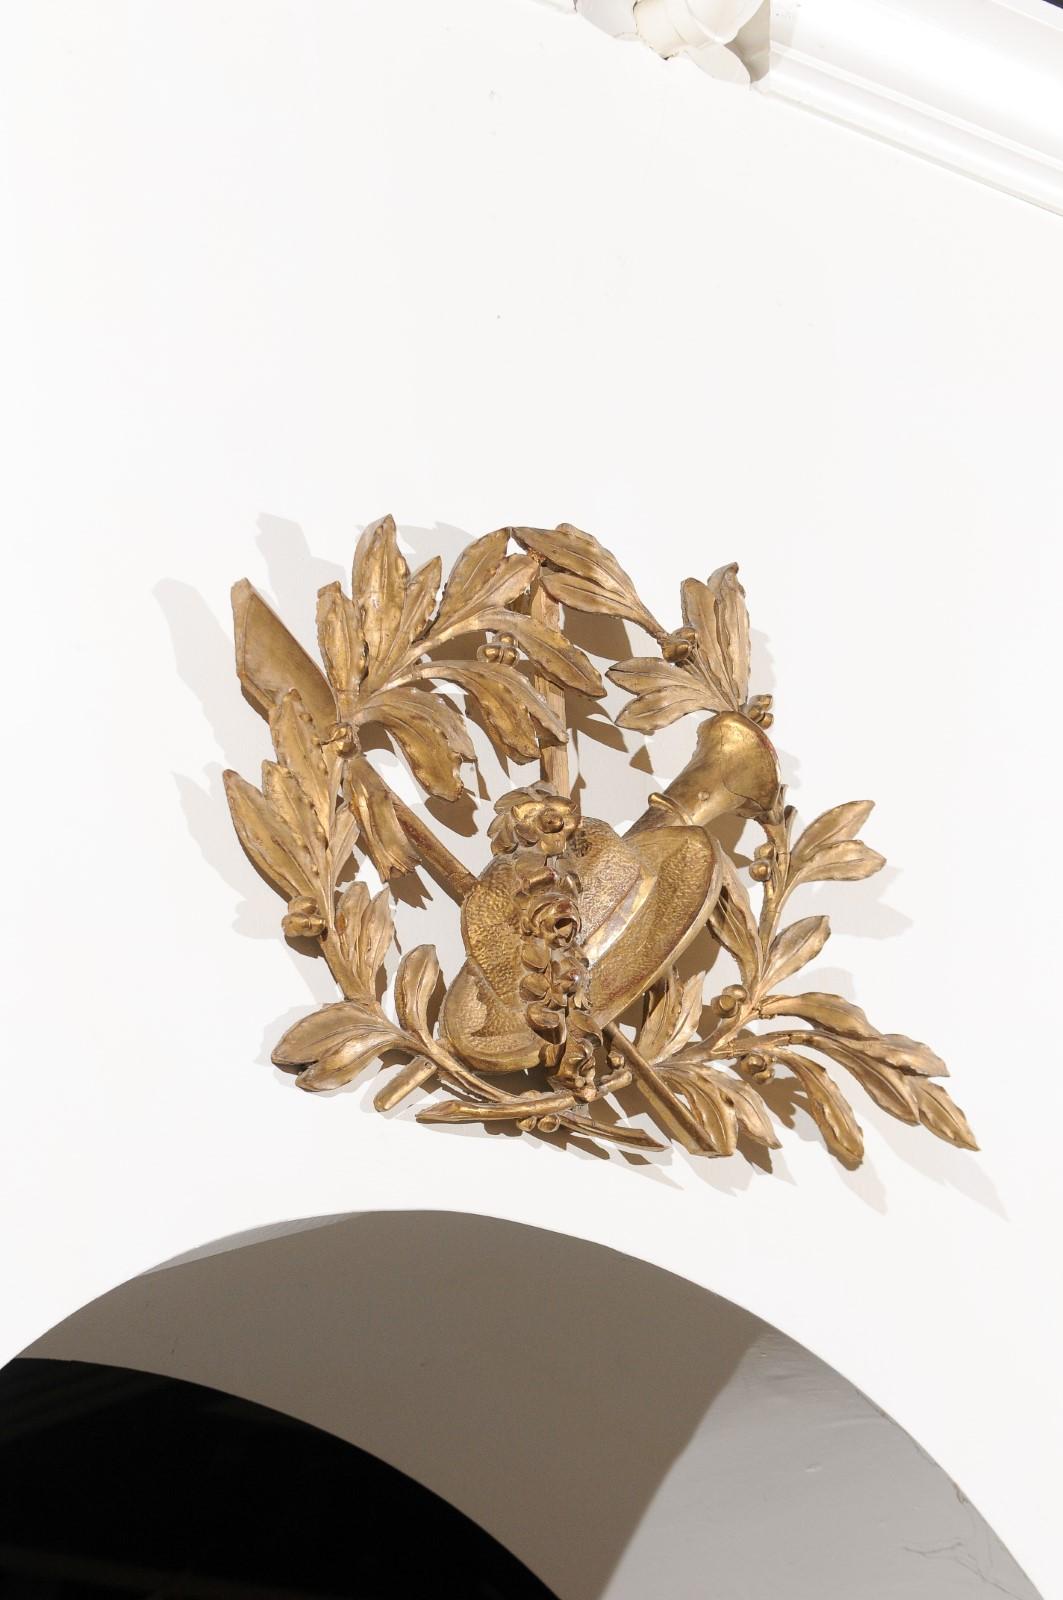 A French hand carved giltwood wall decoration from the 18th century depicting a straw hat, olive branches and instruments. Charming our eyes with its golden tone and exquisitely carved ornaments, this French 18th century wall decoration is centered